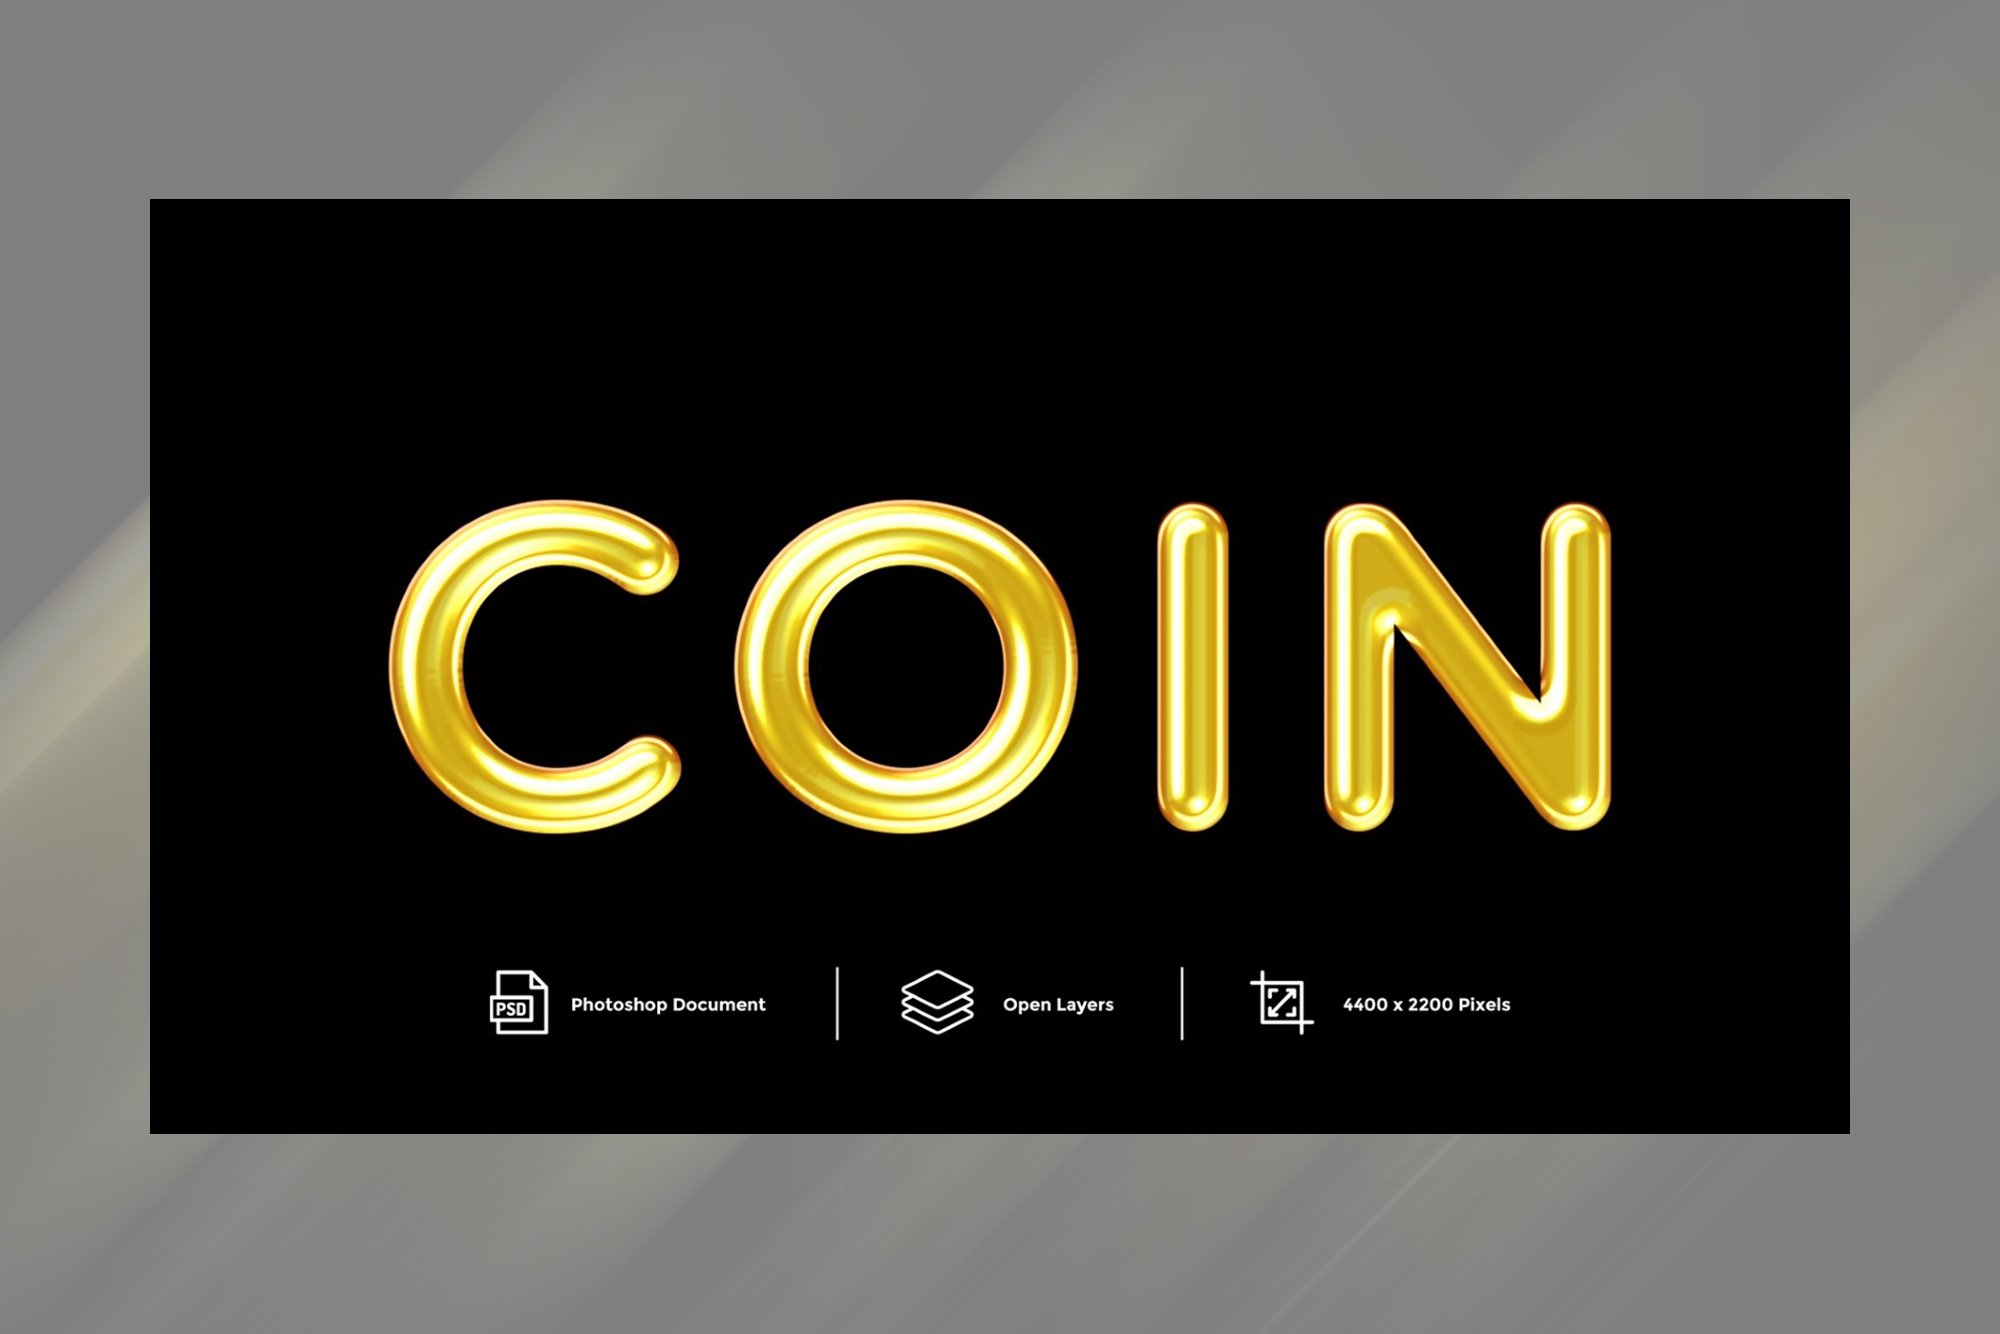 Coin Text Effect Designcover image.